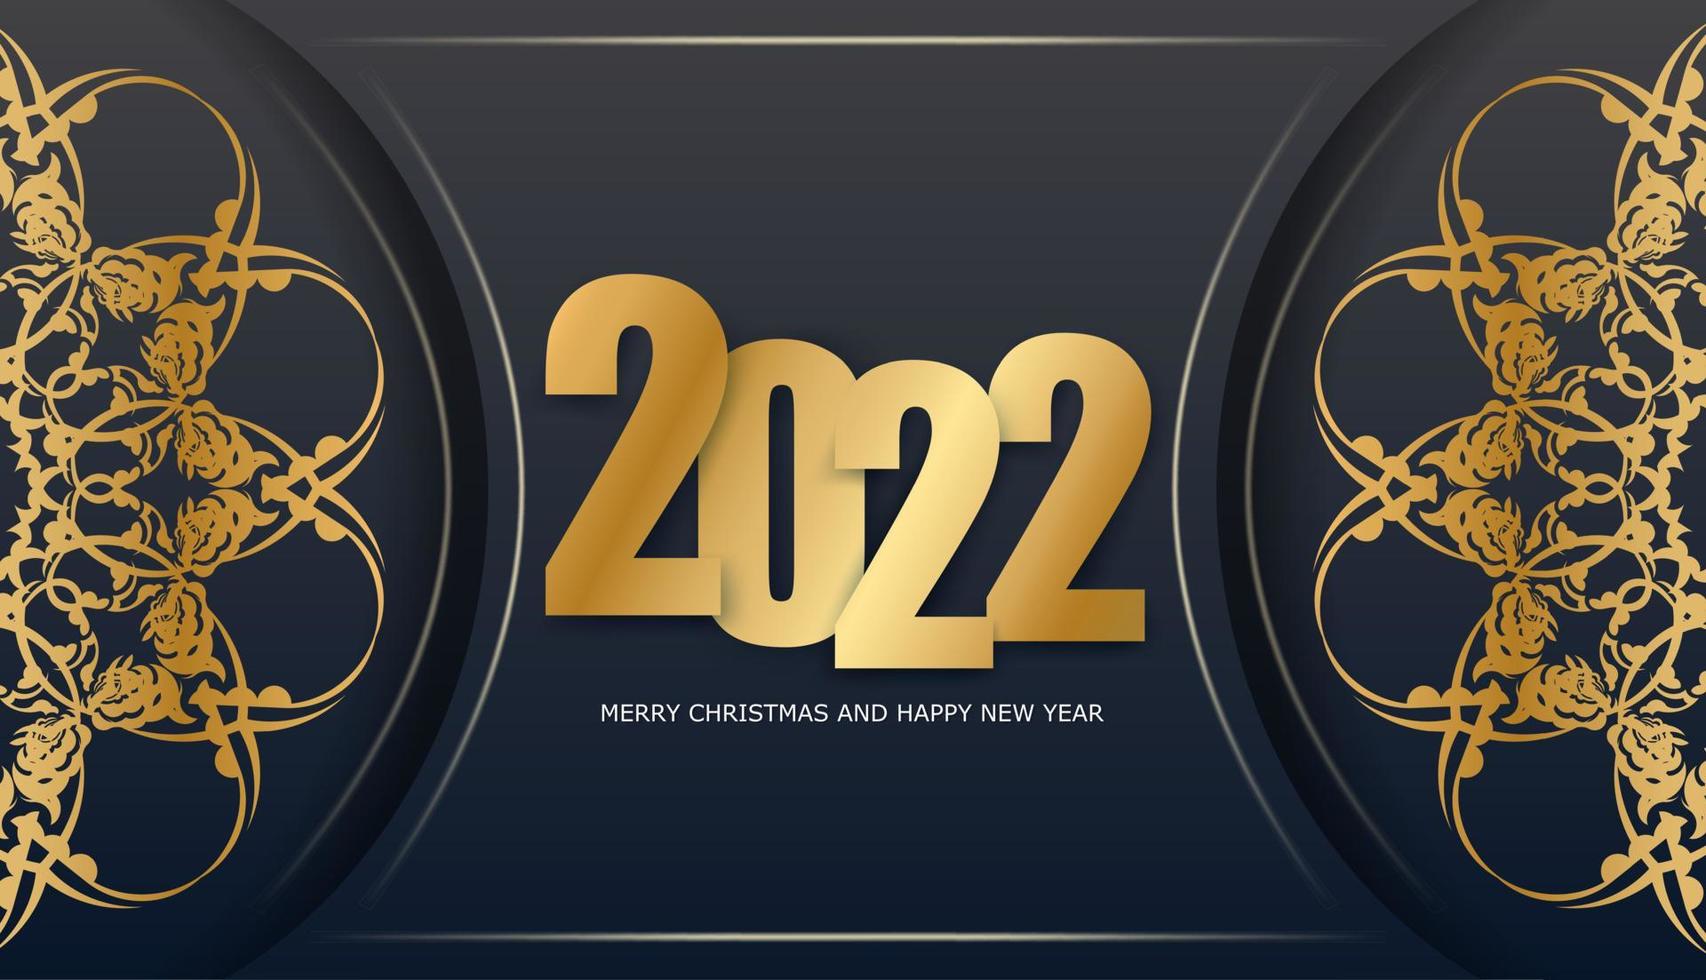 2022 holiday greeting card Happy new year in black with luxury gold ornaments vector